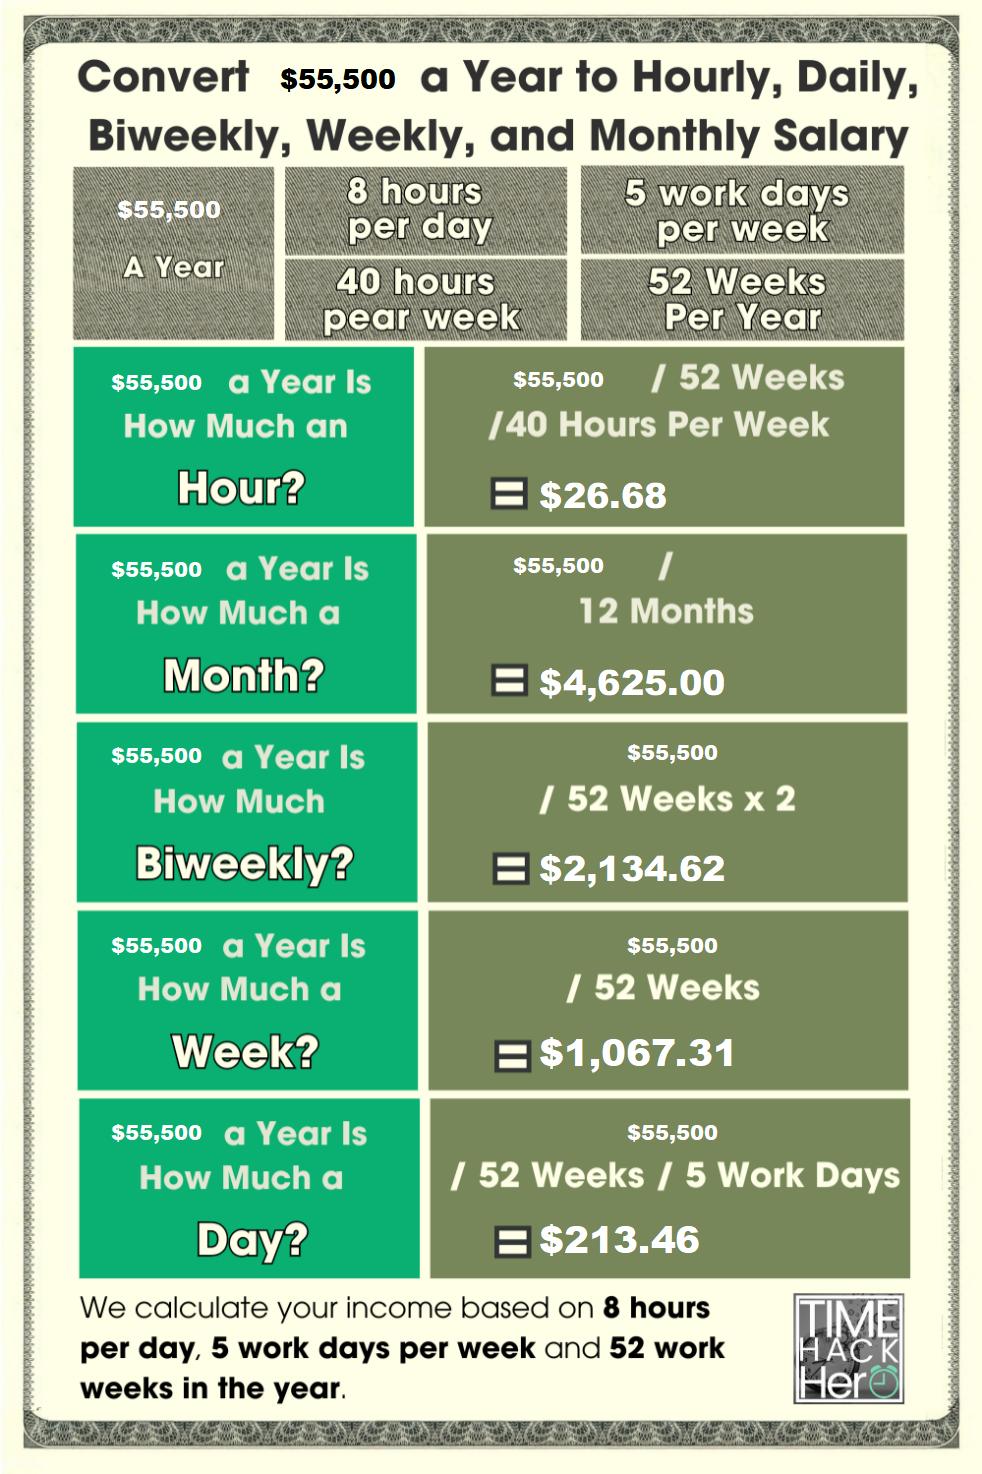 Convert $55500 a Year to Hourly, Daily, Biweekly, Weekly, and Monthly Salary